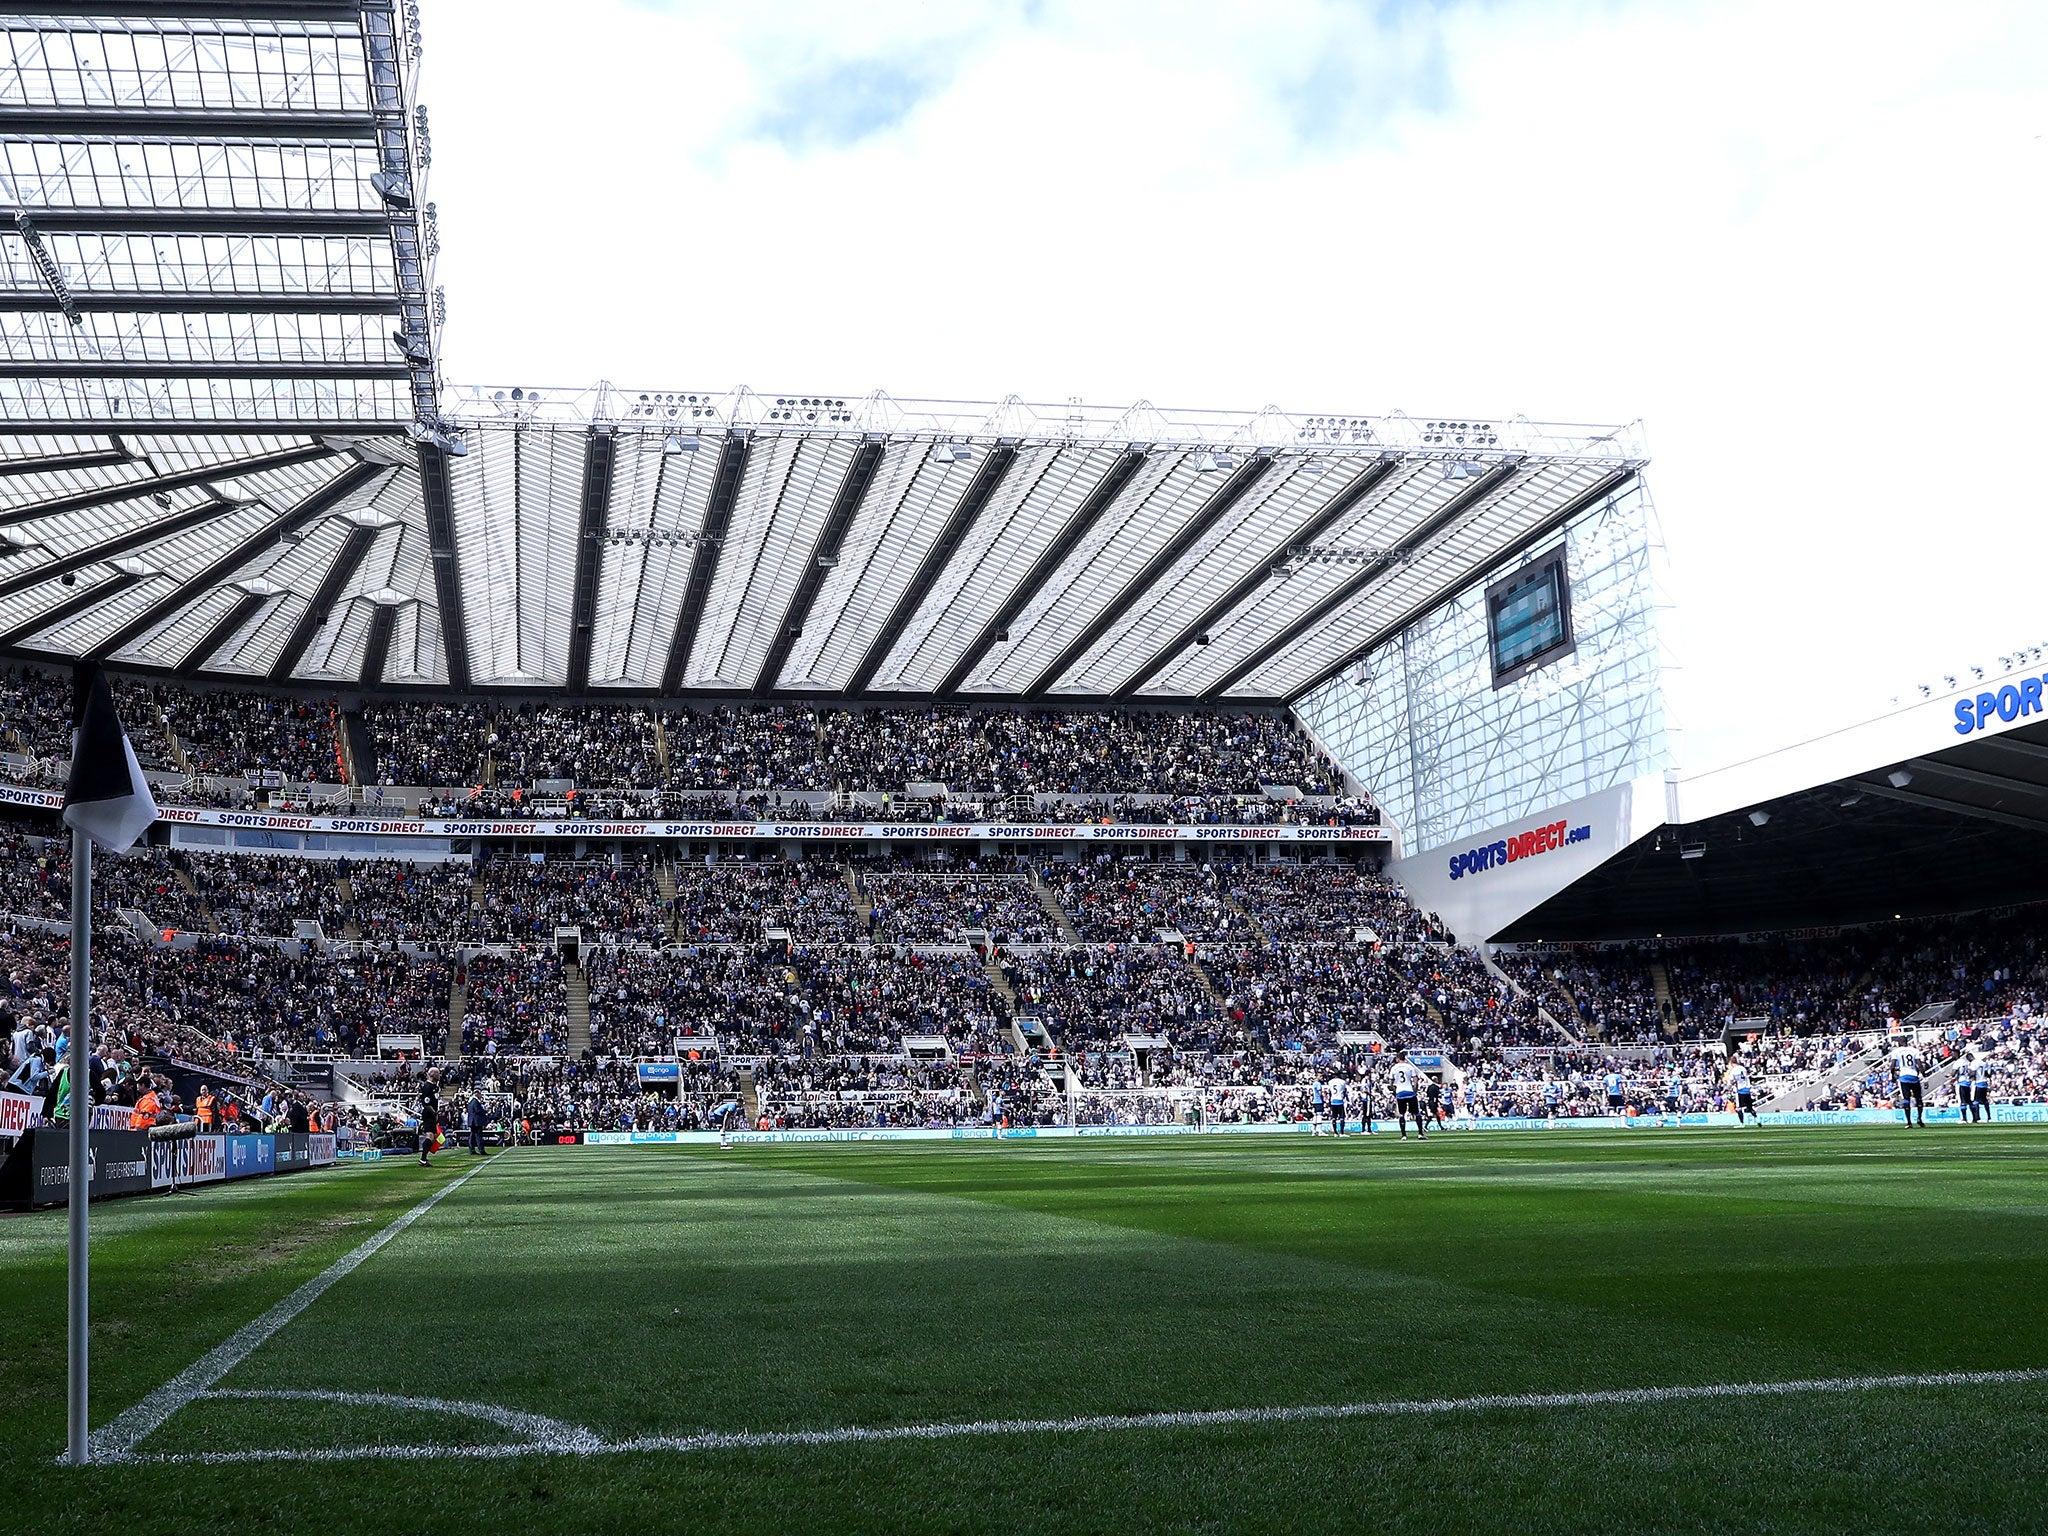 England to face Italy at Newcastle's St James' Park as RFU